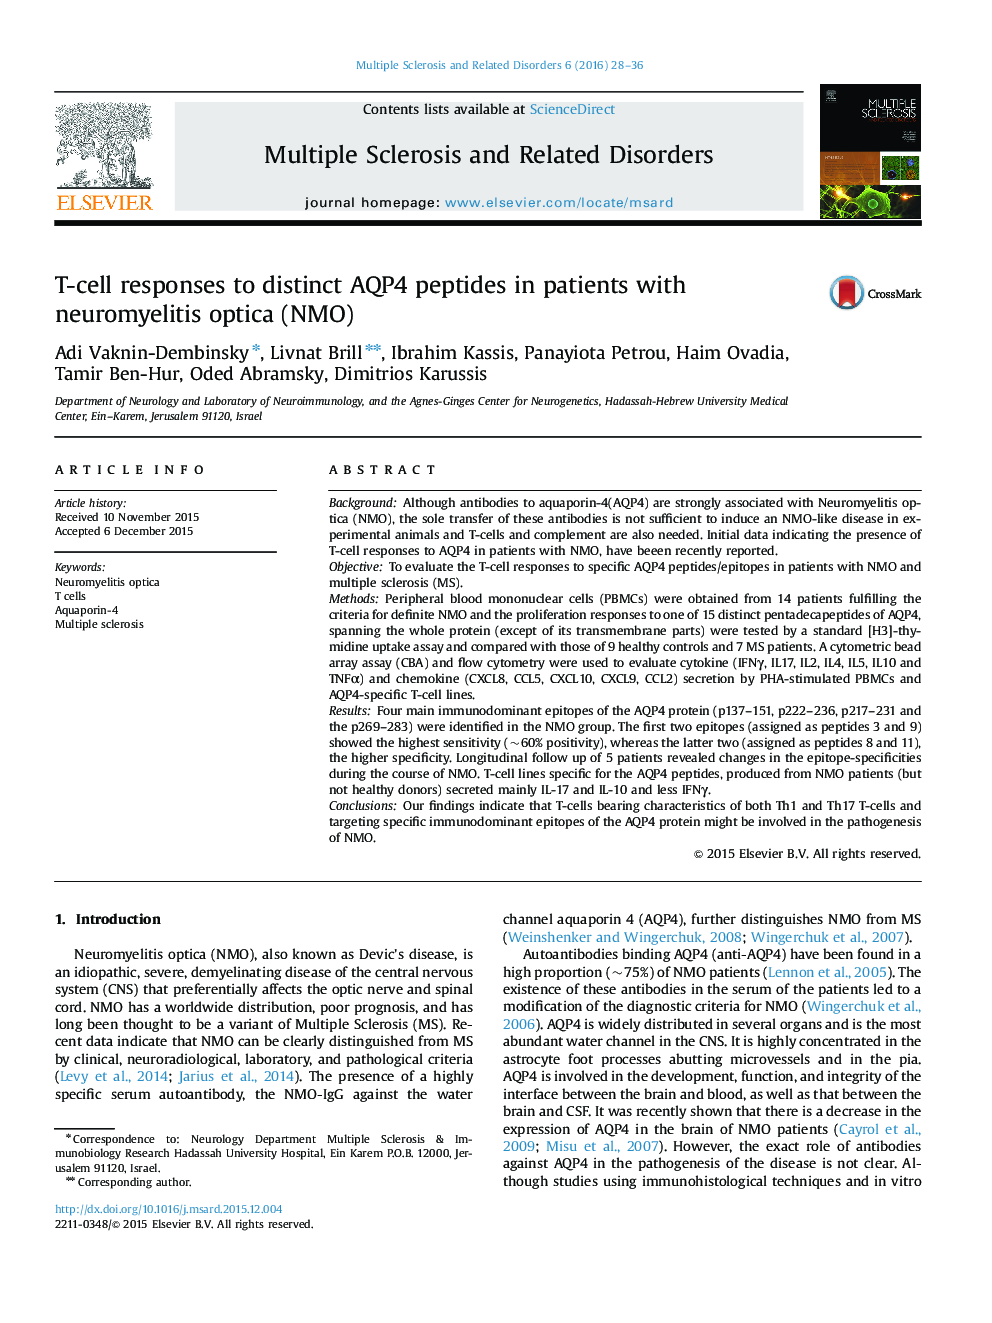 T-cell responses to distinct AQP4 peptides in patients with neuromyelitis optica (NMO)